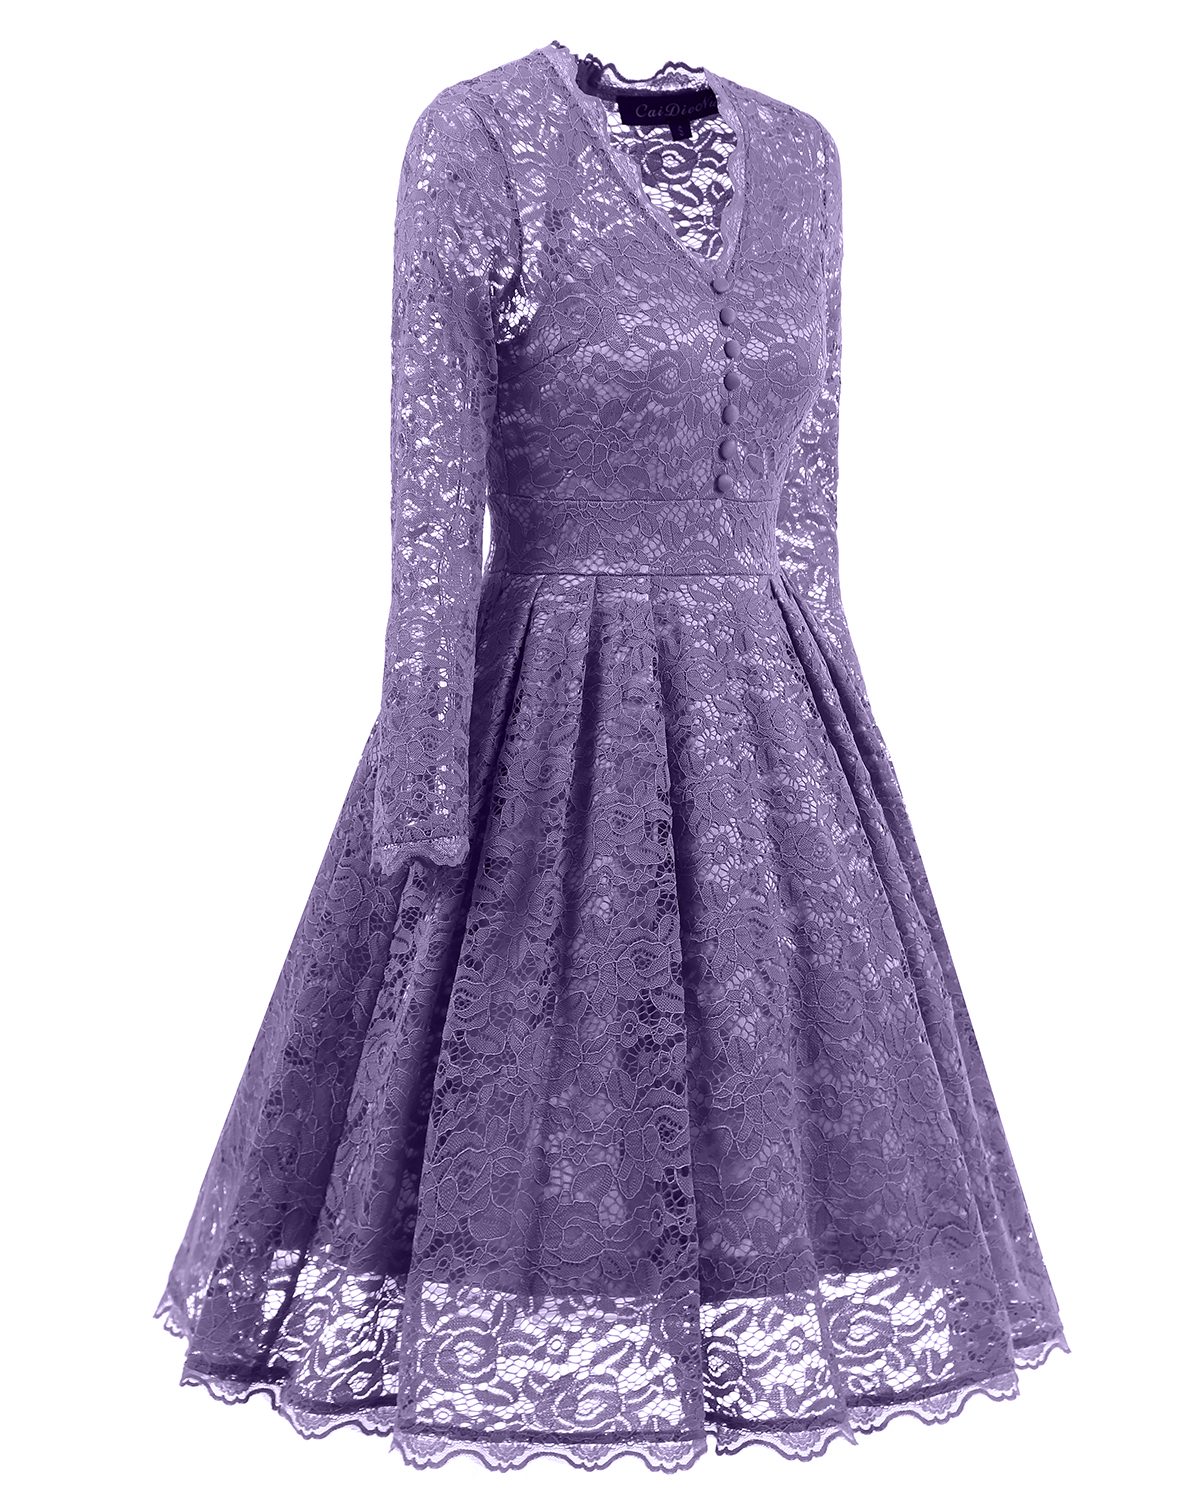 F2528-4 Retro Floral Lace Long Sleeve Vintage Swing Cocktail Bridesmaid Dress